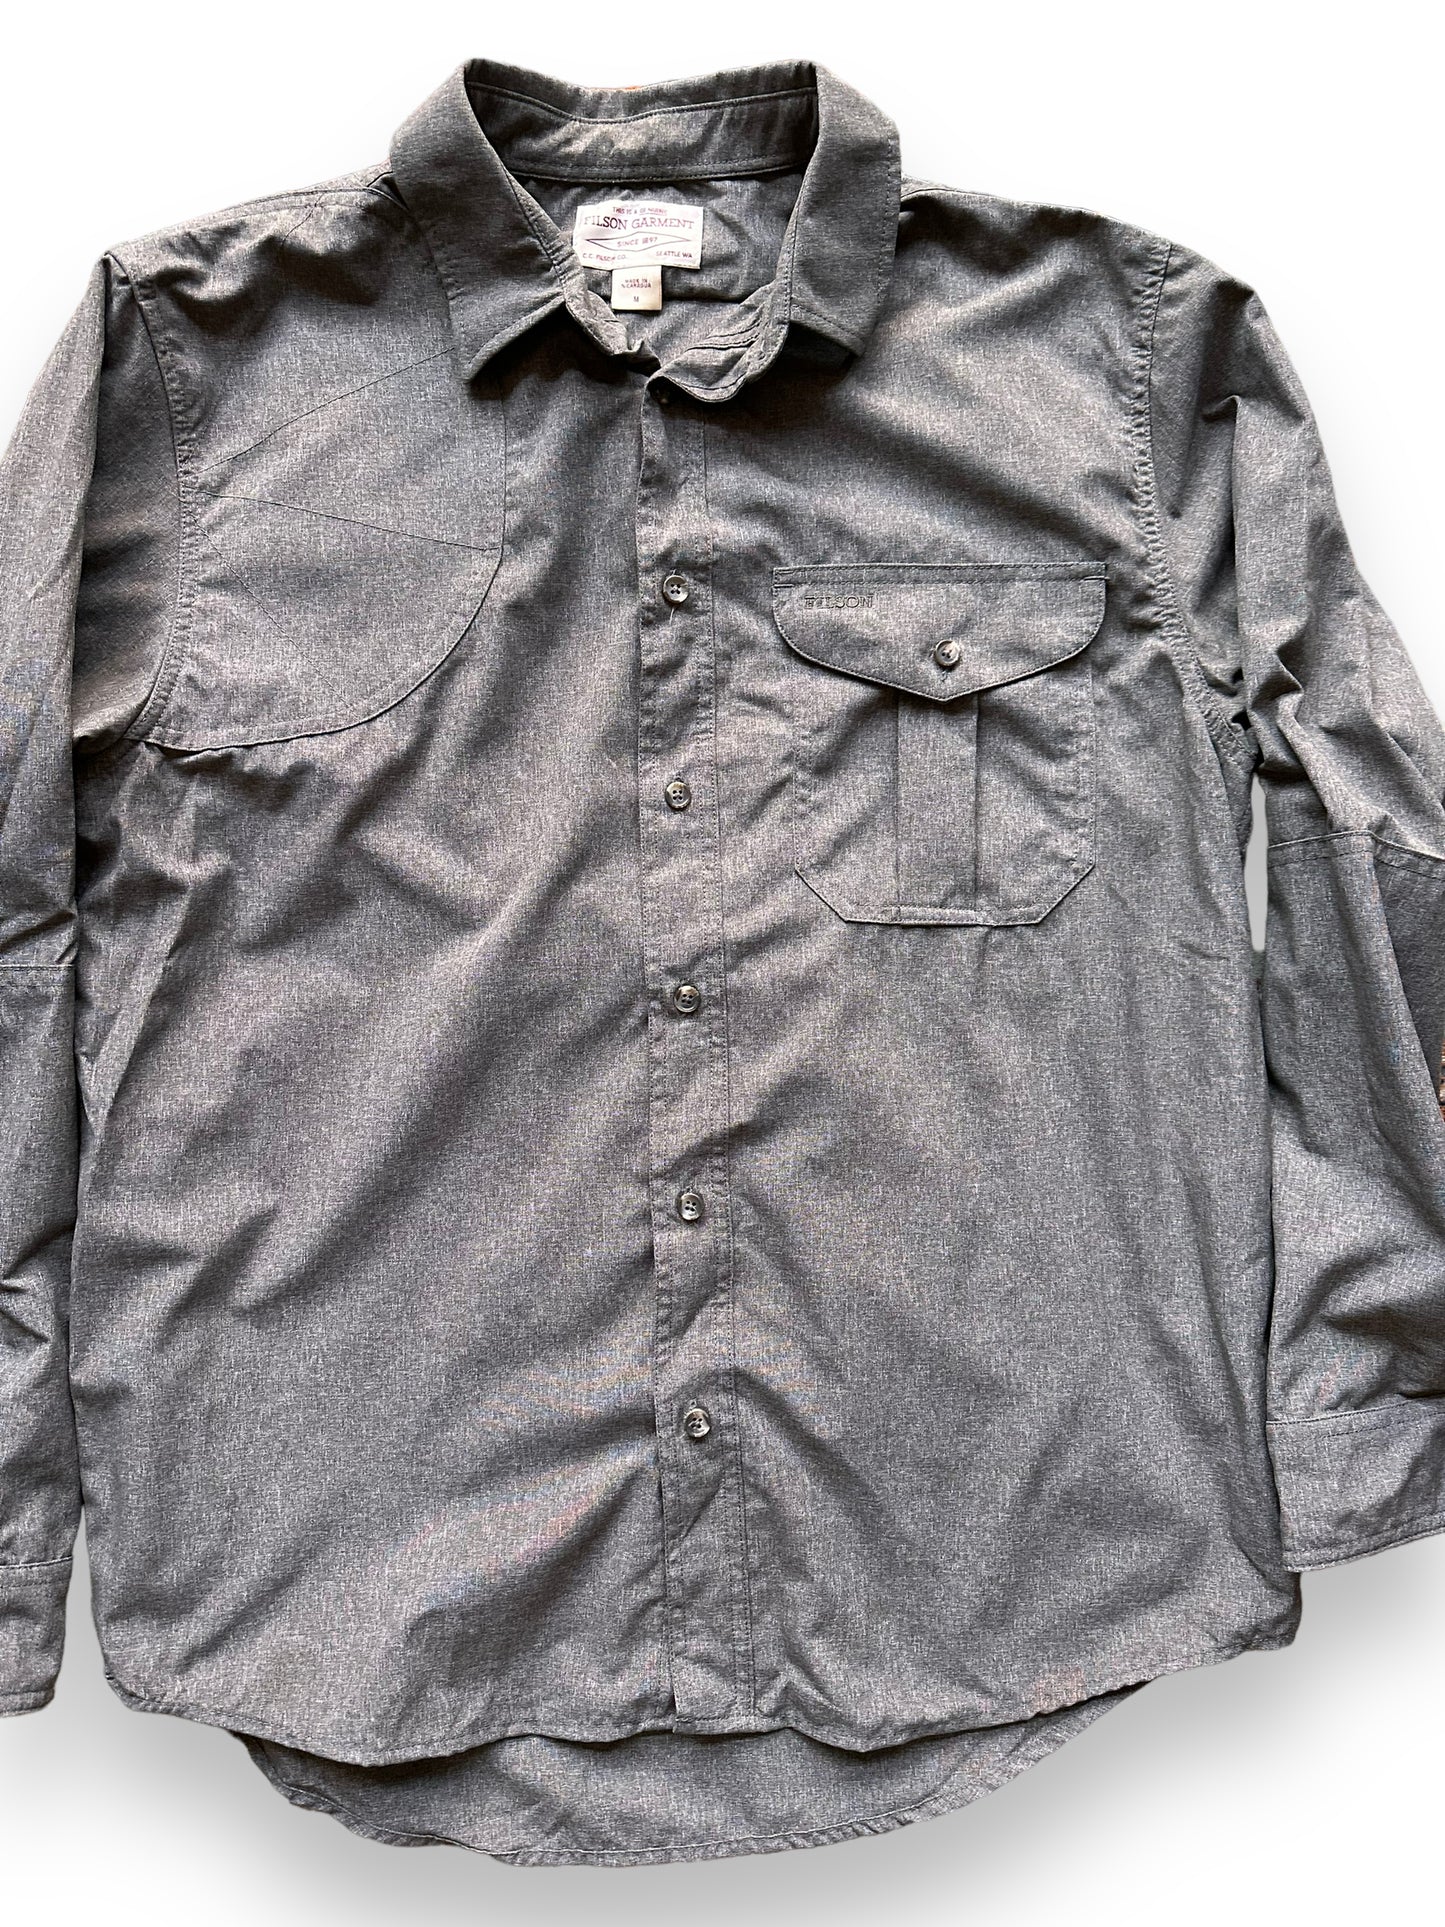 Front Detail on Filson Mulch Colored Right Handed Shooting Shirt SZ M |  Barn Owl Vintage Goods | Vintage Filson Workwear Seattle